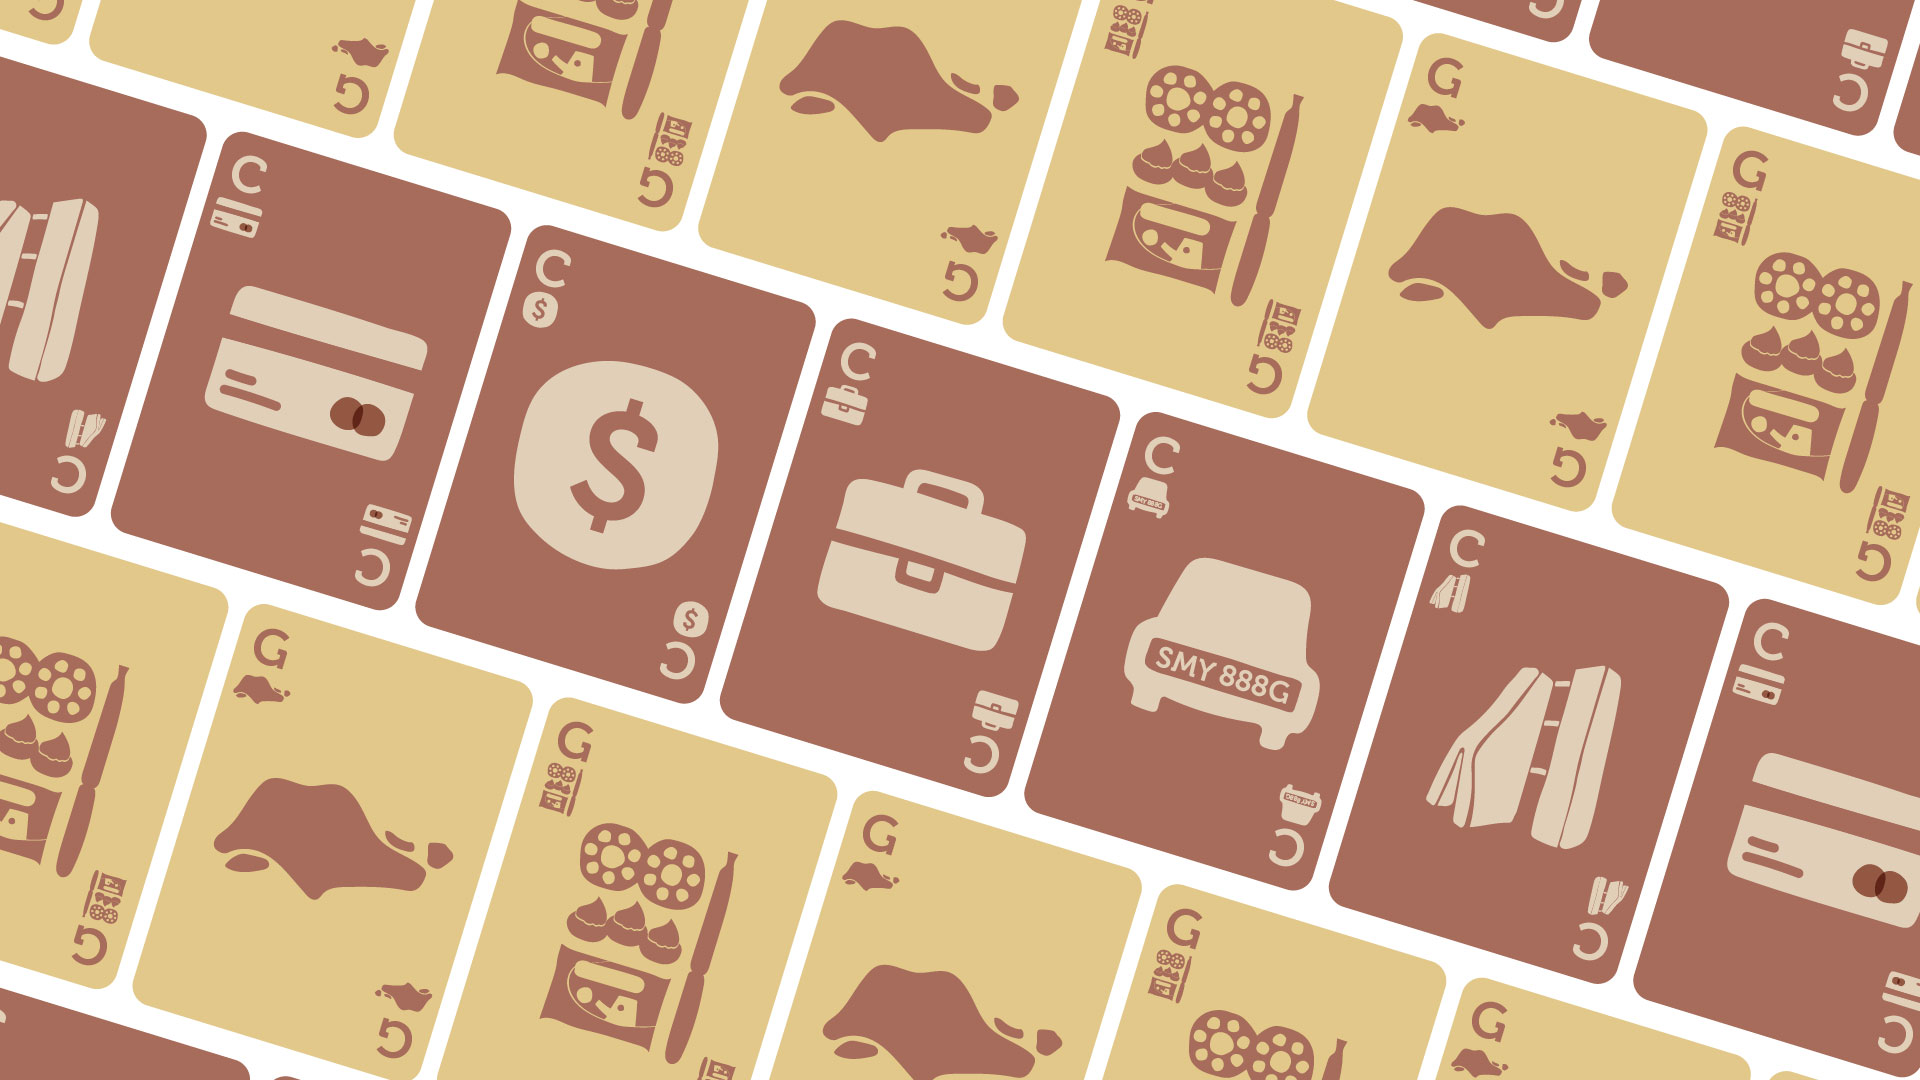 A concept imagery, containing a deck of cards laid out. Each card displays an item which is something people strive for in life, such as credit cards, cash, cars, condominiums, etc.